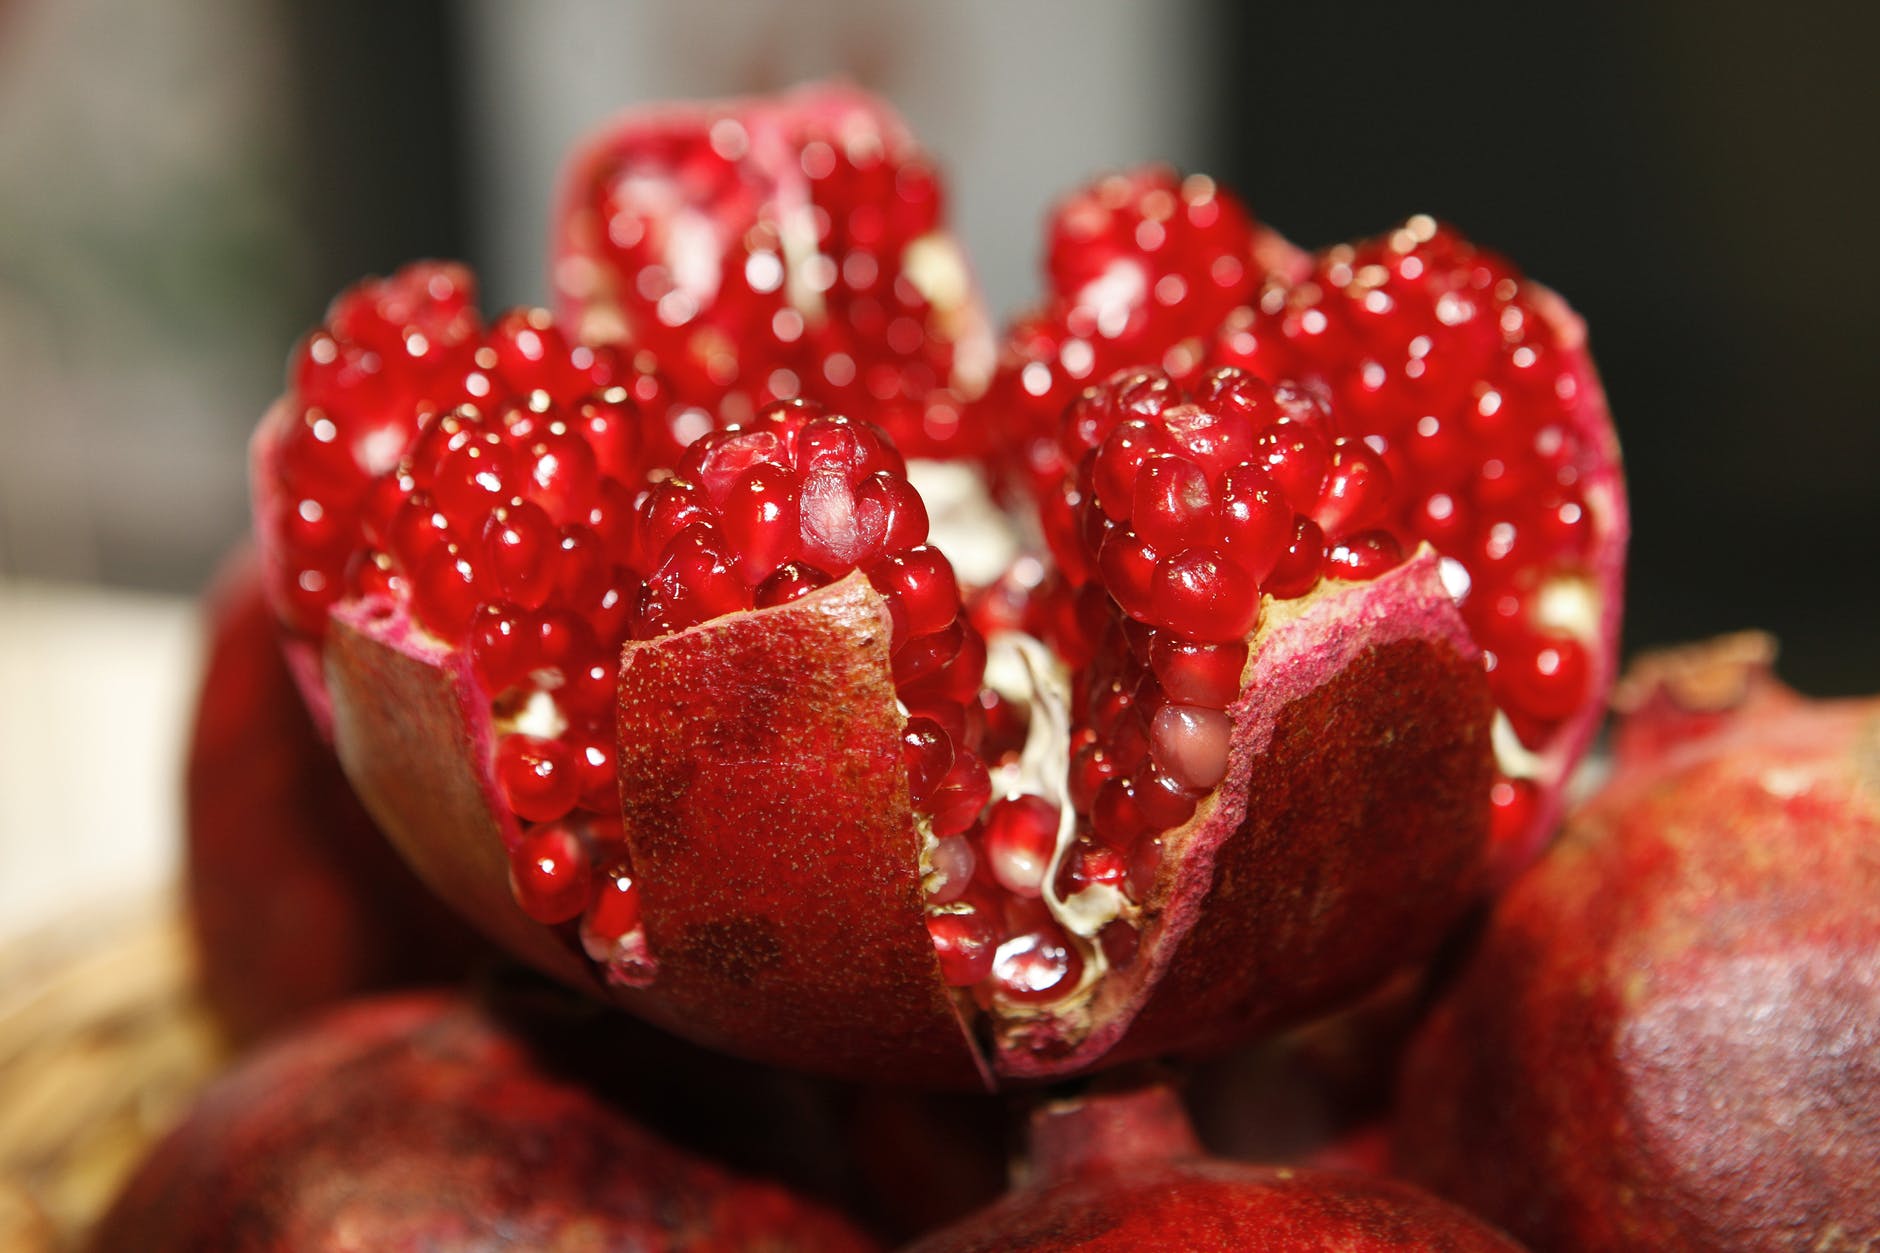 Pomegranate as Immune Booster Food